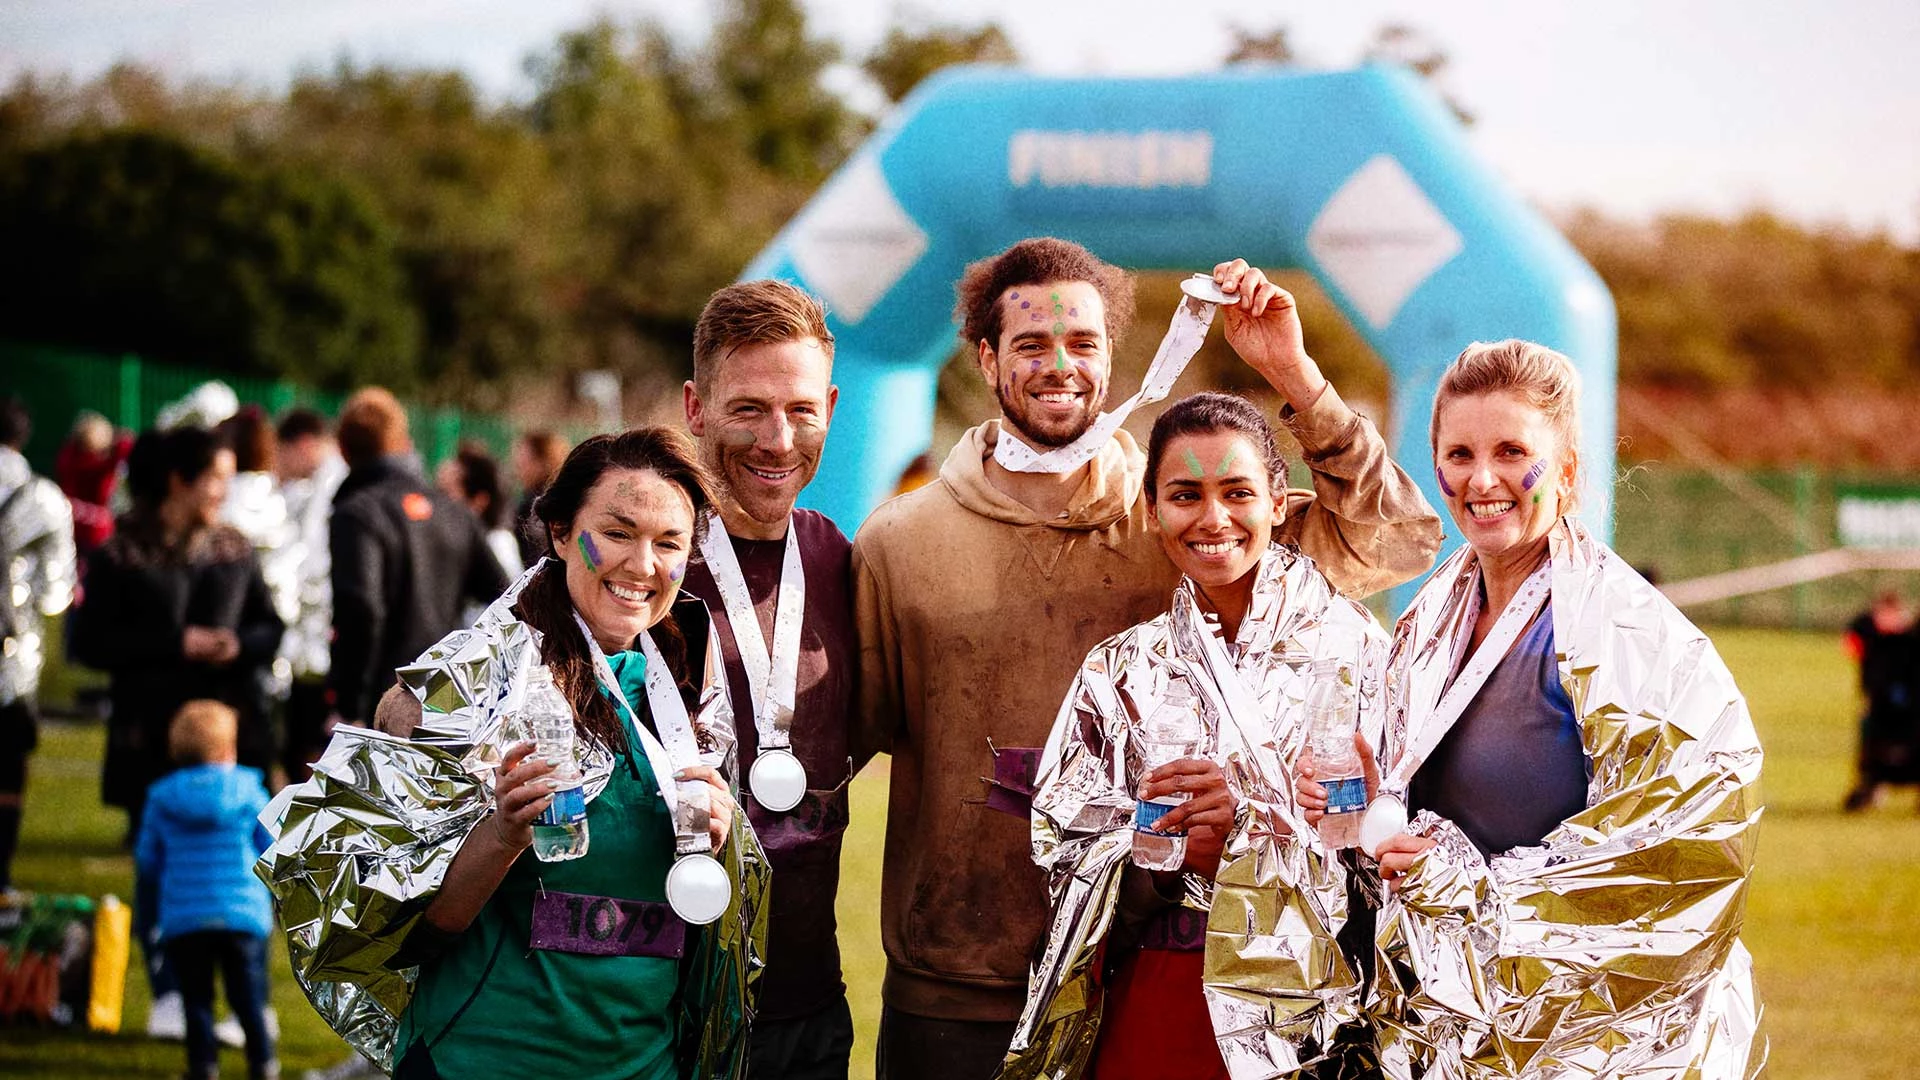 Five people at the end of a marathon with medals